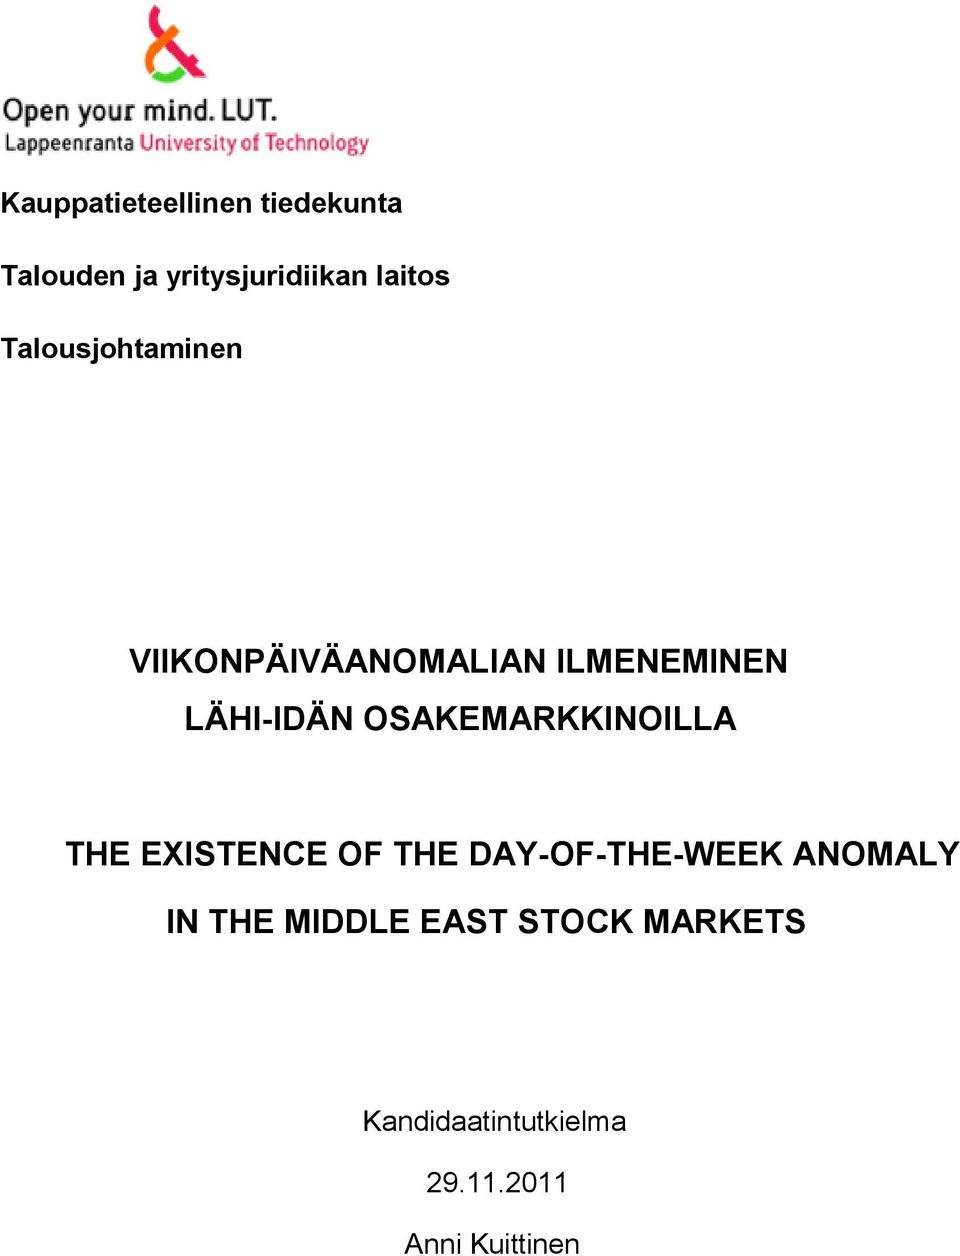 OSAKEMARKKINOILLA THE EXISTENCE OF THE DAY-OF-THE-WEEK ANOMALY IN